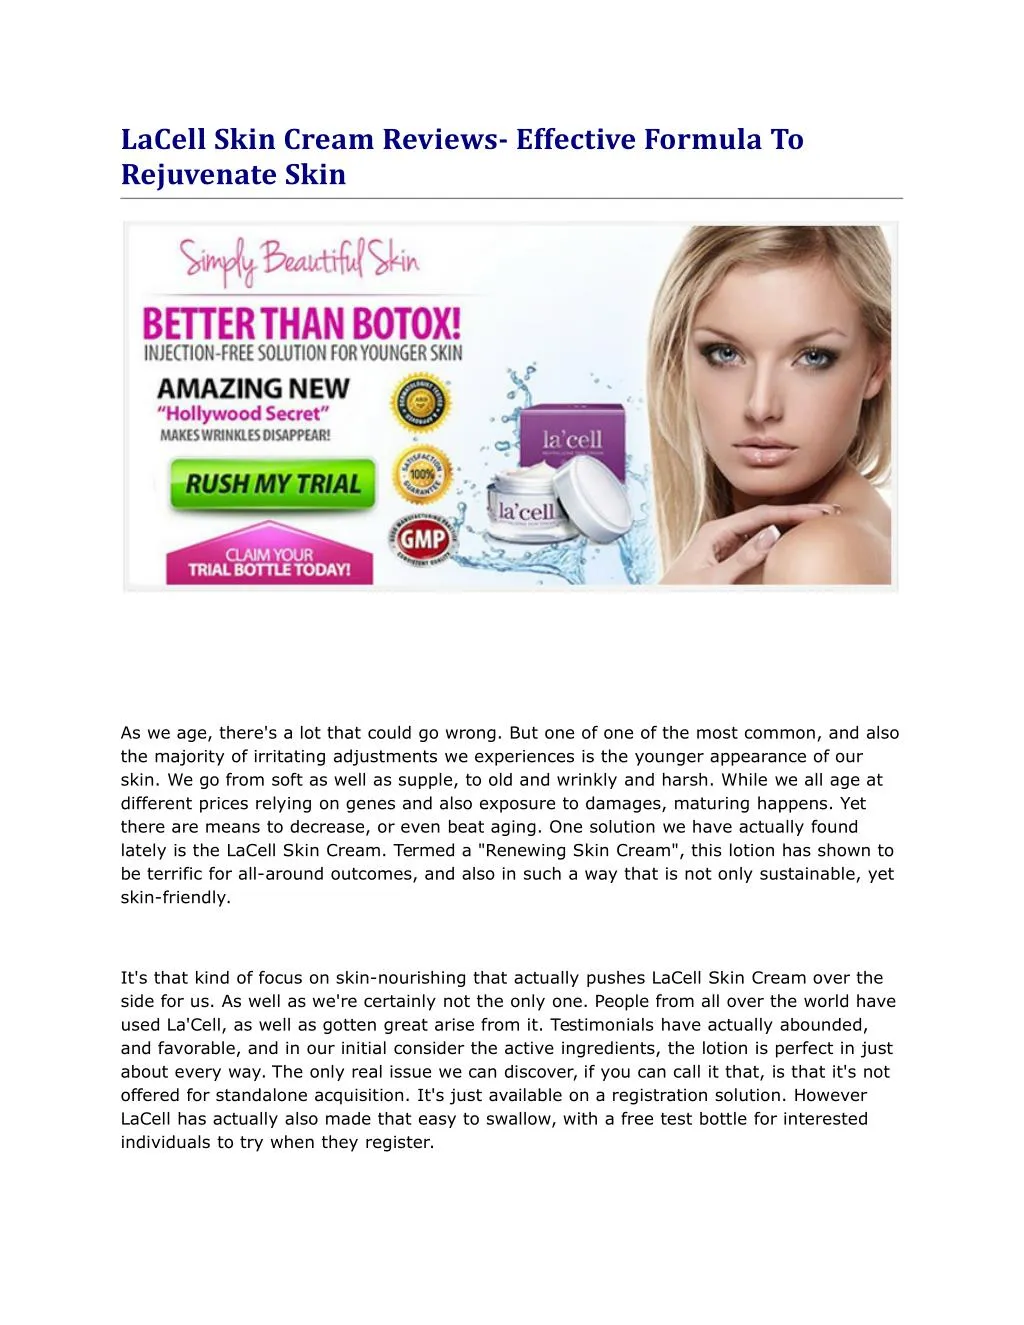 lacell skin cream reviews effective formula